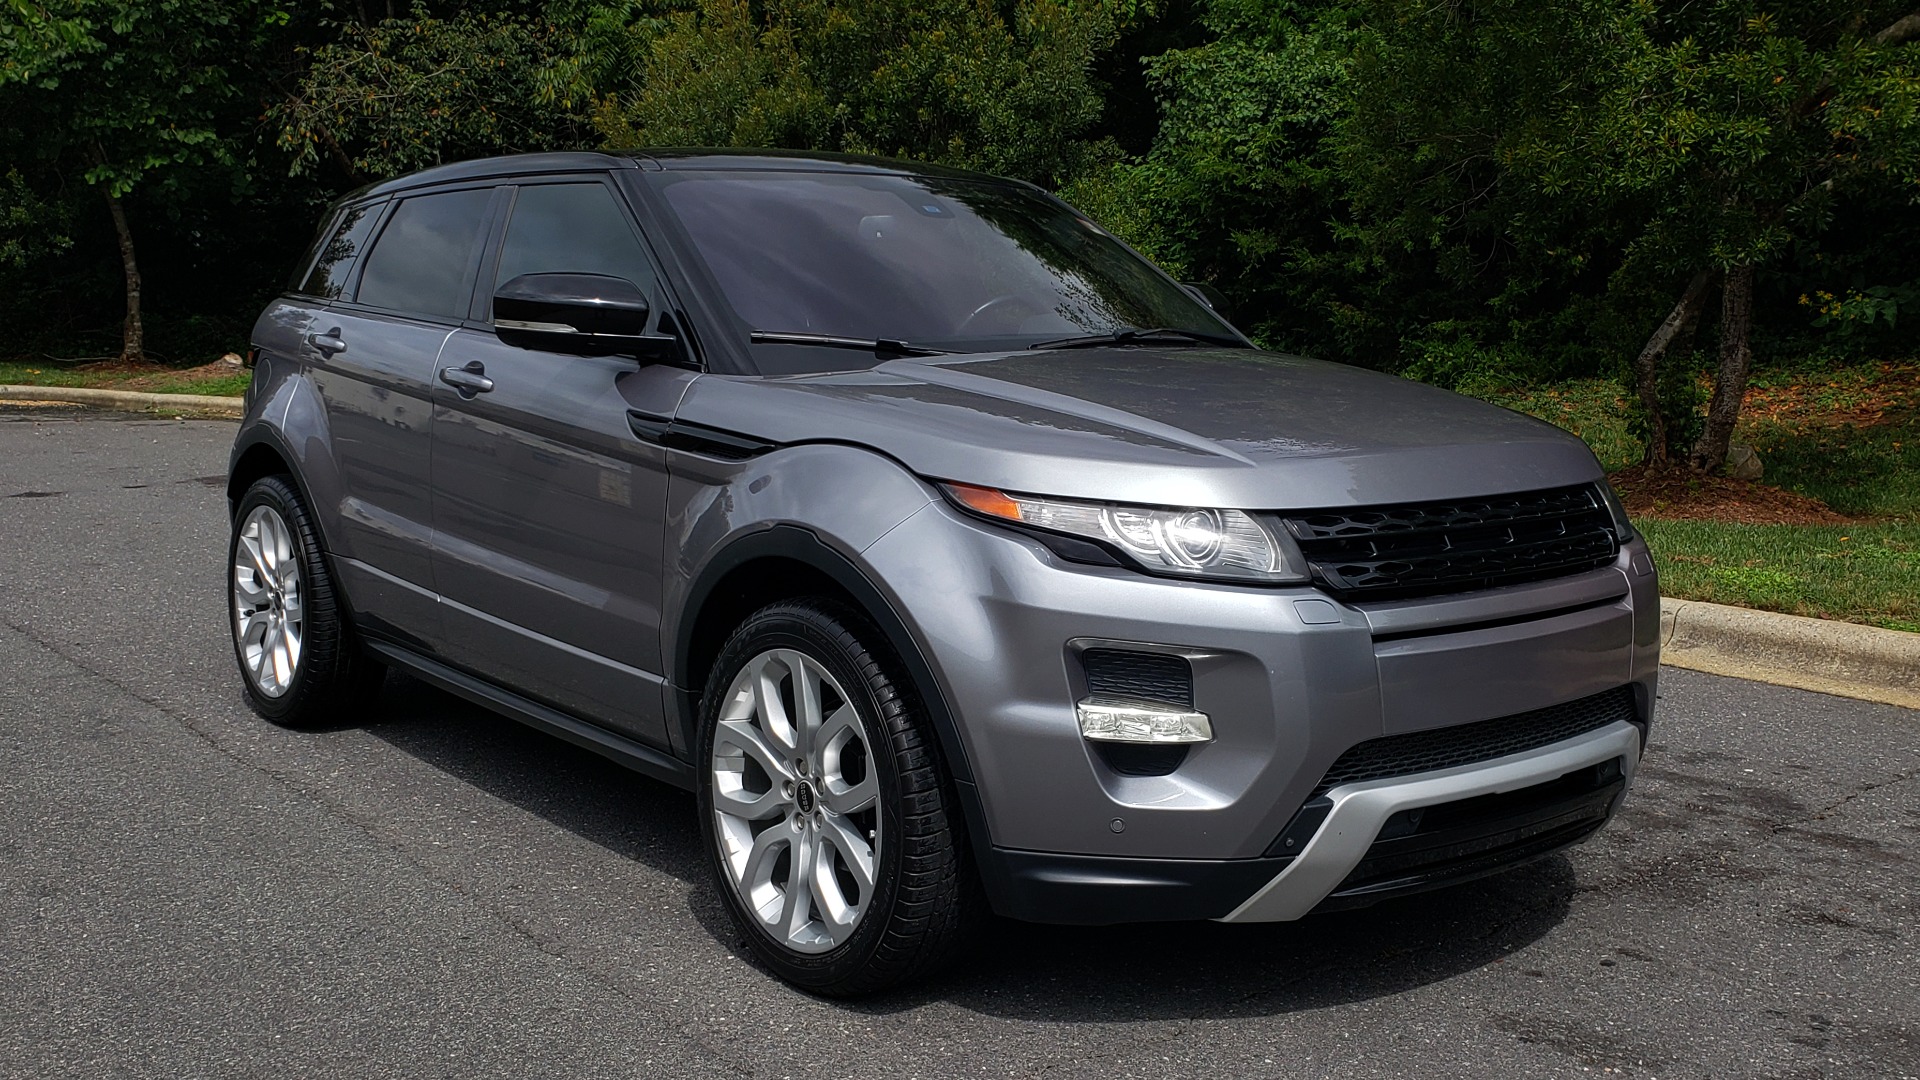 Used 2013 Land Rover RANGE ROVER EVOQUE DYNAMIC PREMIUM / NAV / PANO-ROOF / BLIND SPOT / REARVIEW for sale Sold at Formula Imports in Charlotte NC 28227 6